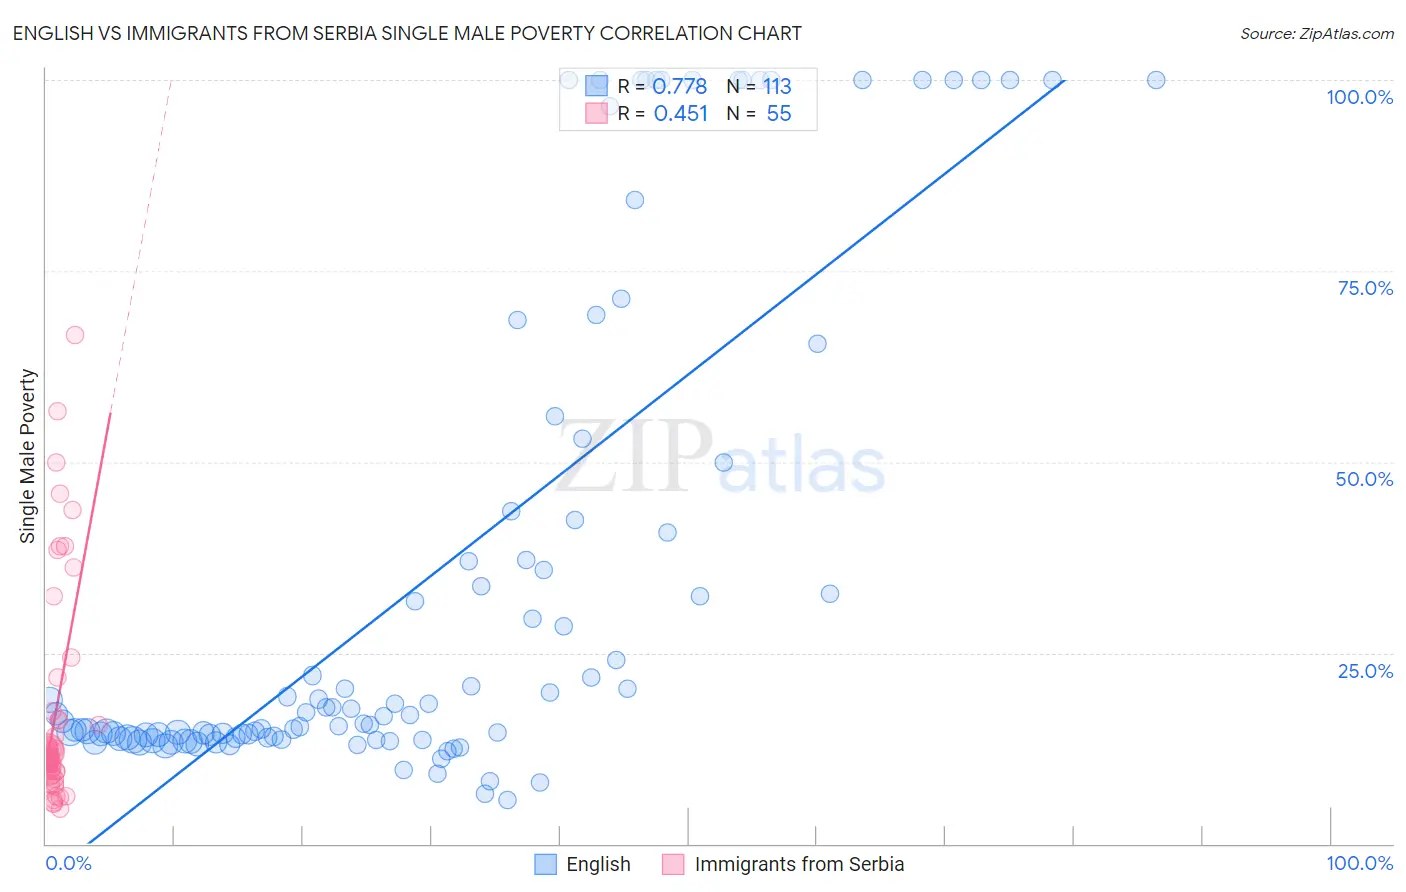 English vs Immigrants from Serbia Single Male Poverty